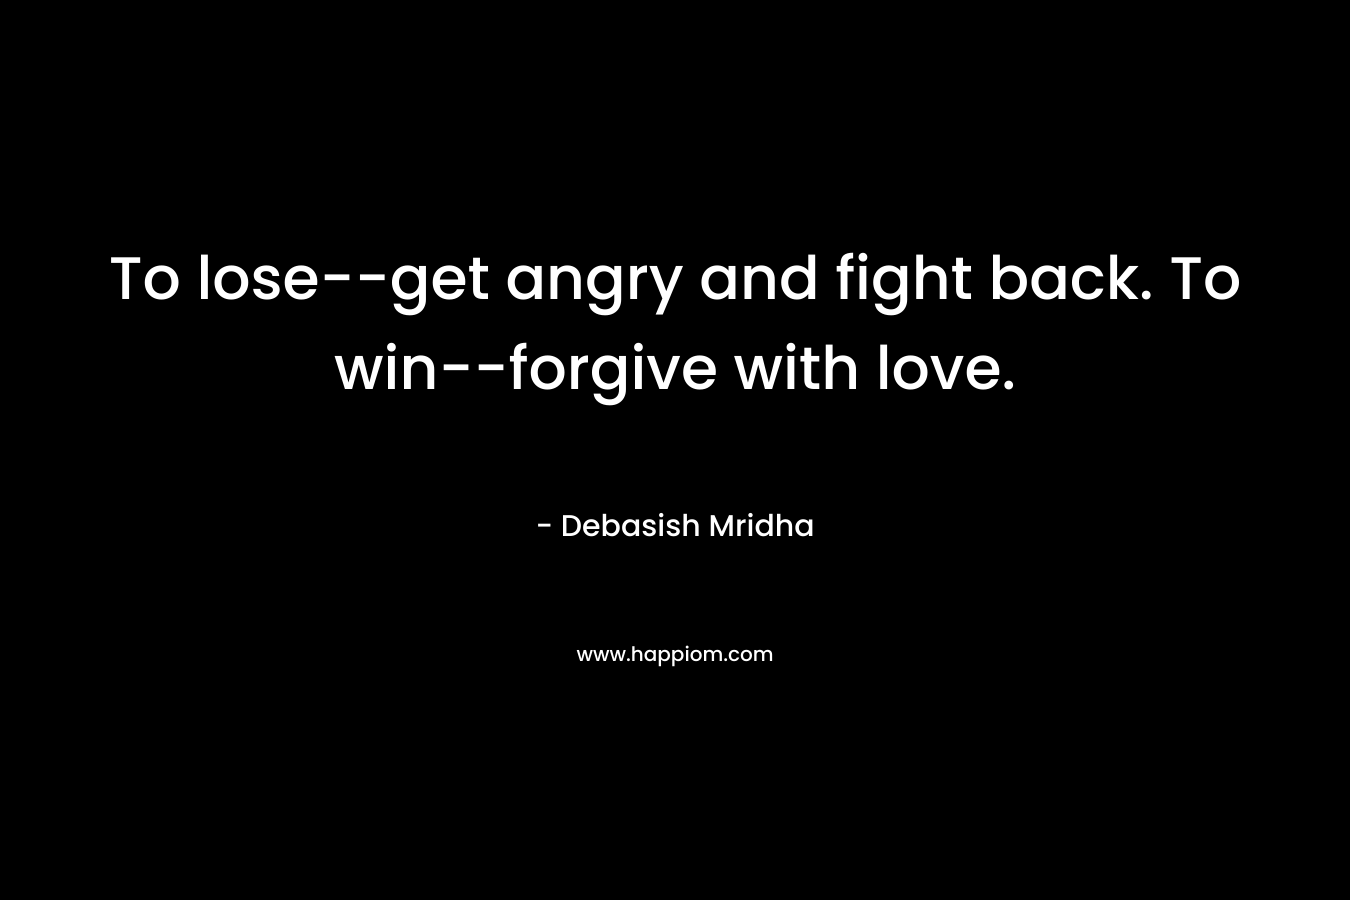 To lose--get angry and fight back. To win--forgive with love.